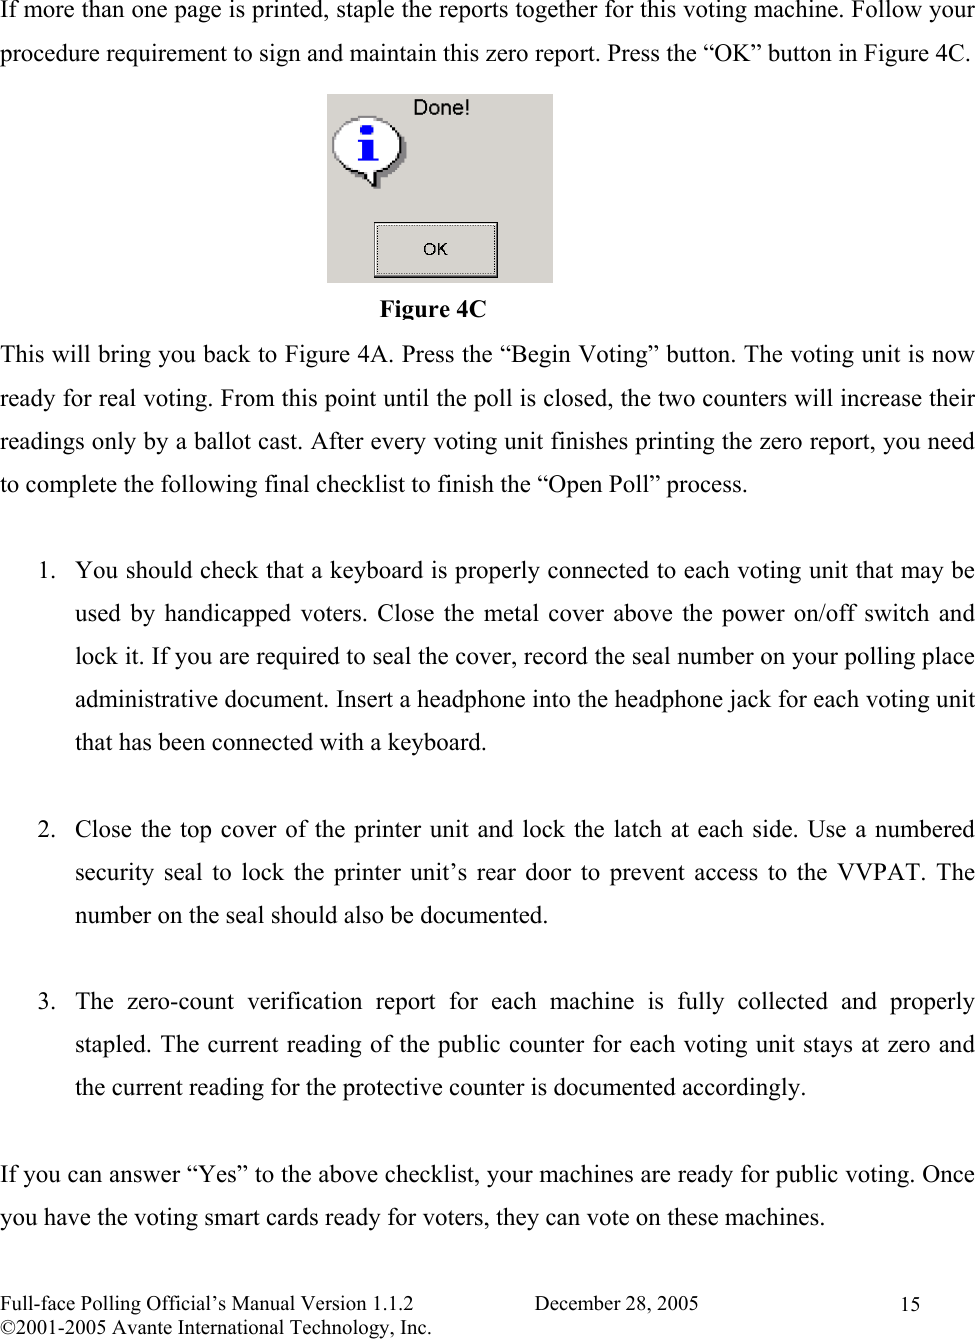    Full-face Polling Official’s Manual Version 1.1.2                       December 28, 2005 ©2001-2005 Avante International Technology, Inc.   15 If more than one page is printed, staple the reports together for this voting machine. Follow your procedure requirement to sign and maintain this zero report. Press the “OK” button in Figure 4C.       This will bring you back to Figure 4A. Press the “Begin Voting” button. The voting unit is now ready for real voting. From this point until the poll is closed, the two counters will increase their readings only by a ballot cast. After every voting unit finishes printing the zero report, you need to complete the following final checklist to finish the “Open Poll” process.  1.  You should check that a keyboard is properly connected to each voting unit that may be used by handicapped voters. Close the metal cover above the power on/off switch and lock it. If you are required to seal the cover, record the seal number on your polling place administrative document. Insert a headphone into the headphone jack for each voting unit that has been connected with a keyboard.    2.  Close the top cover of the printer unit and lock the latch at each side. Use a numbered security seal to lock the printer unit’s rear door to prevent access to the VVPAT. The number on the seal should also be documented.   3.  The zero-count verification report for each machine is fully collected and properly stapled. The current reading of the public counter for each voting unit stays at zero and the current reading for the protective counter is documented accordingly.  If you can answer “Yes” to the above checklist, your machines are ready for public voting. Once you have the voting smart cards ready for voters, they can vote on these machines. Figure 4C